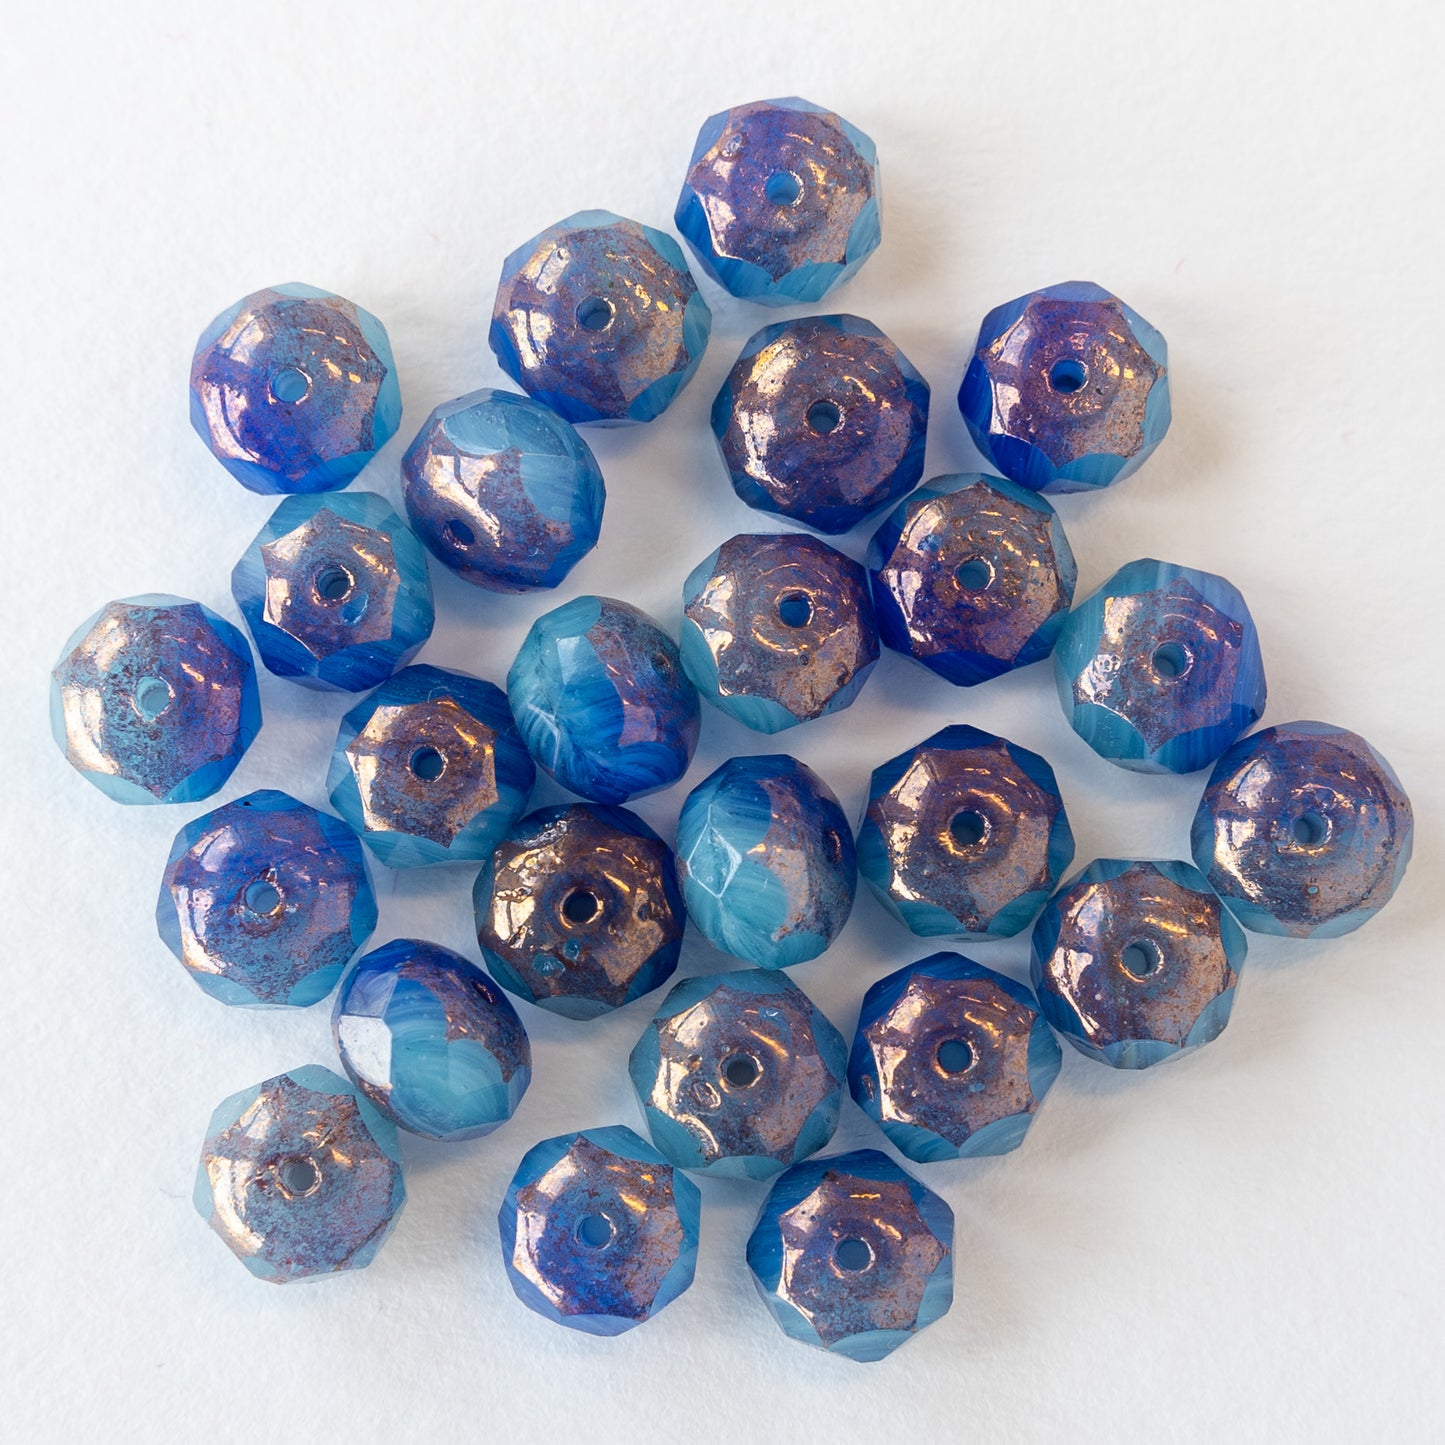 6x9mm Rondelle Beads - Blue Mix with Bronze Finish - 25 Beads